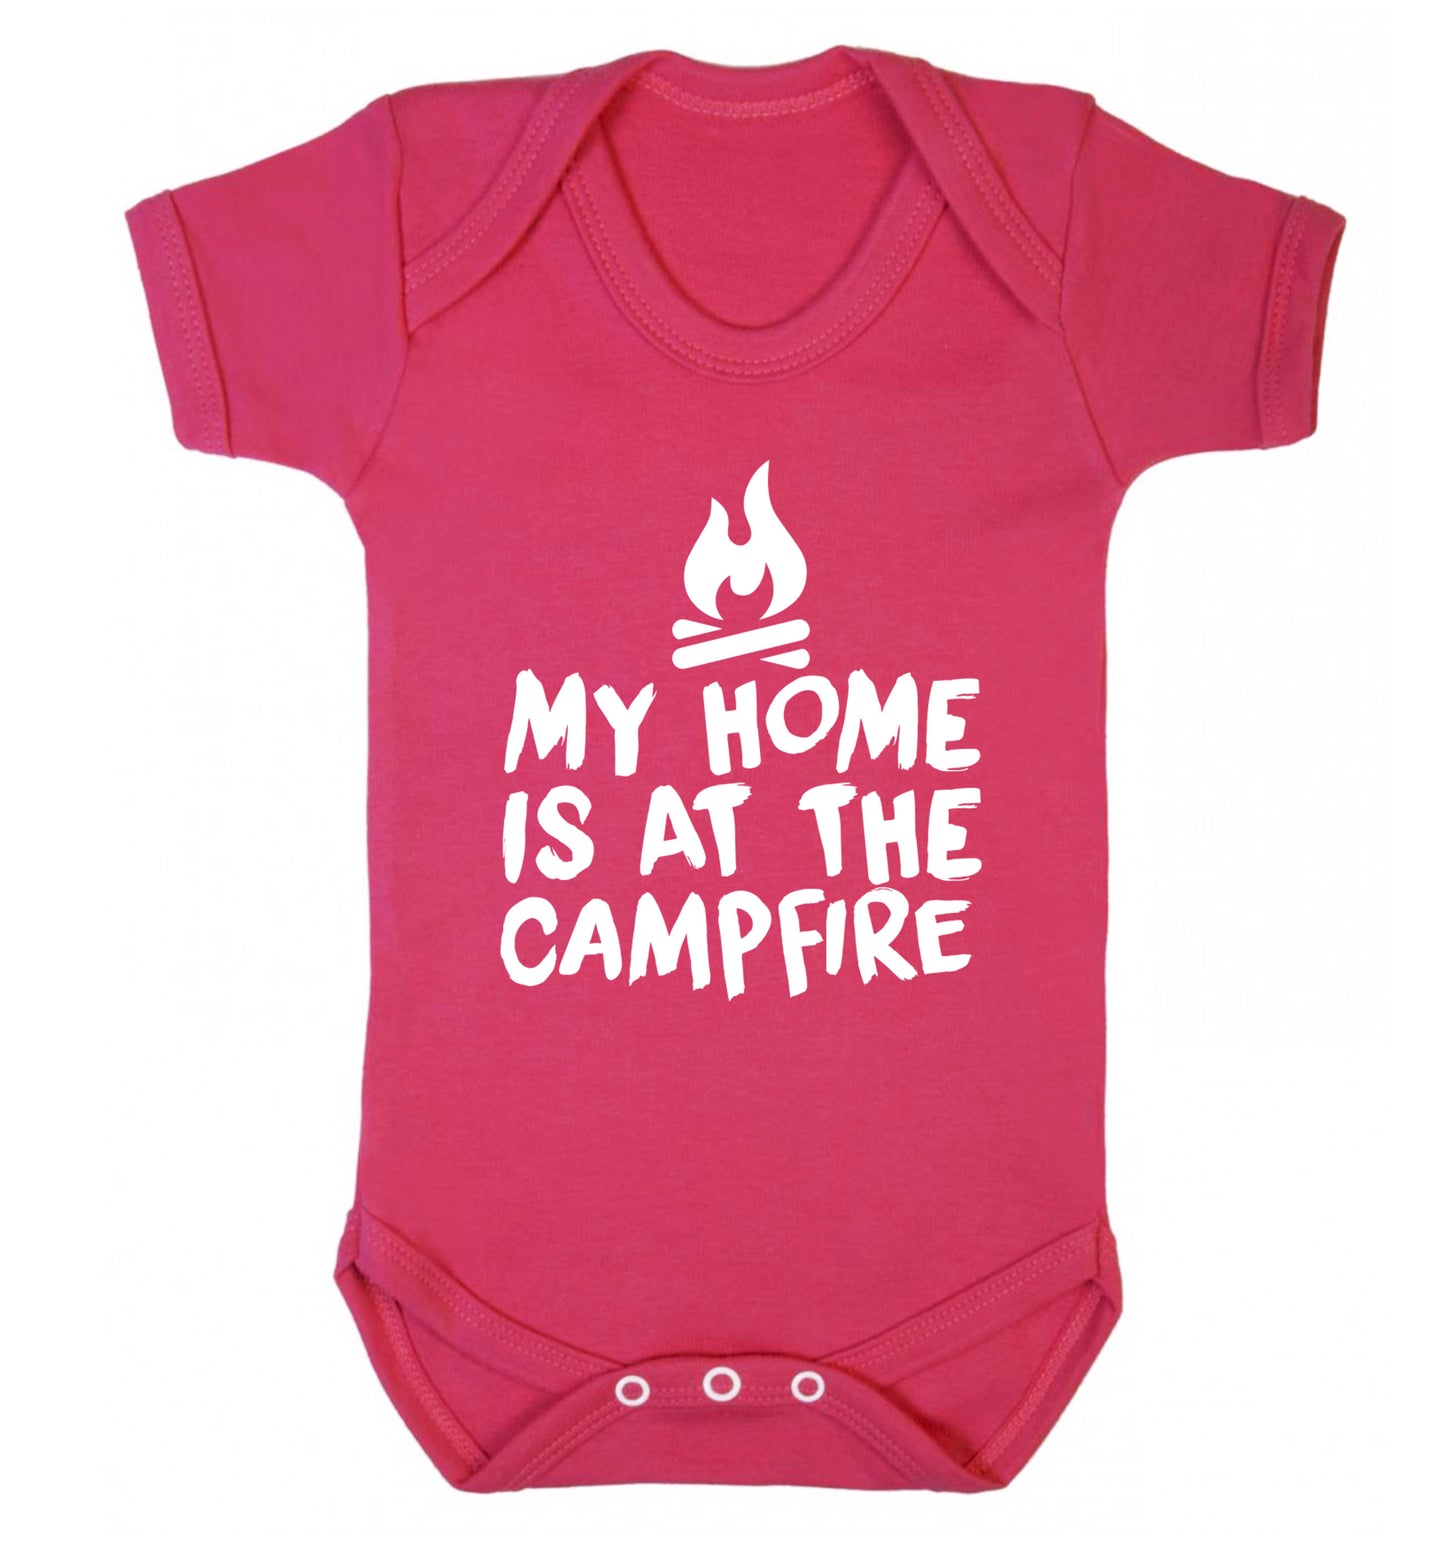 My home is at the campfire Baby Vest dark pink 18-24 months